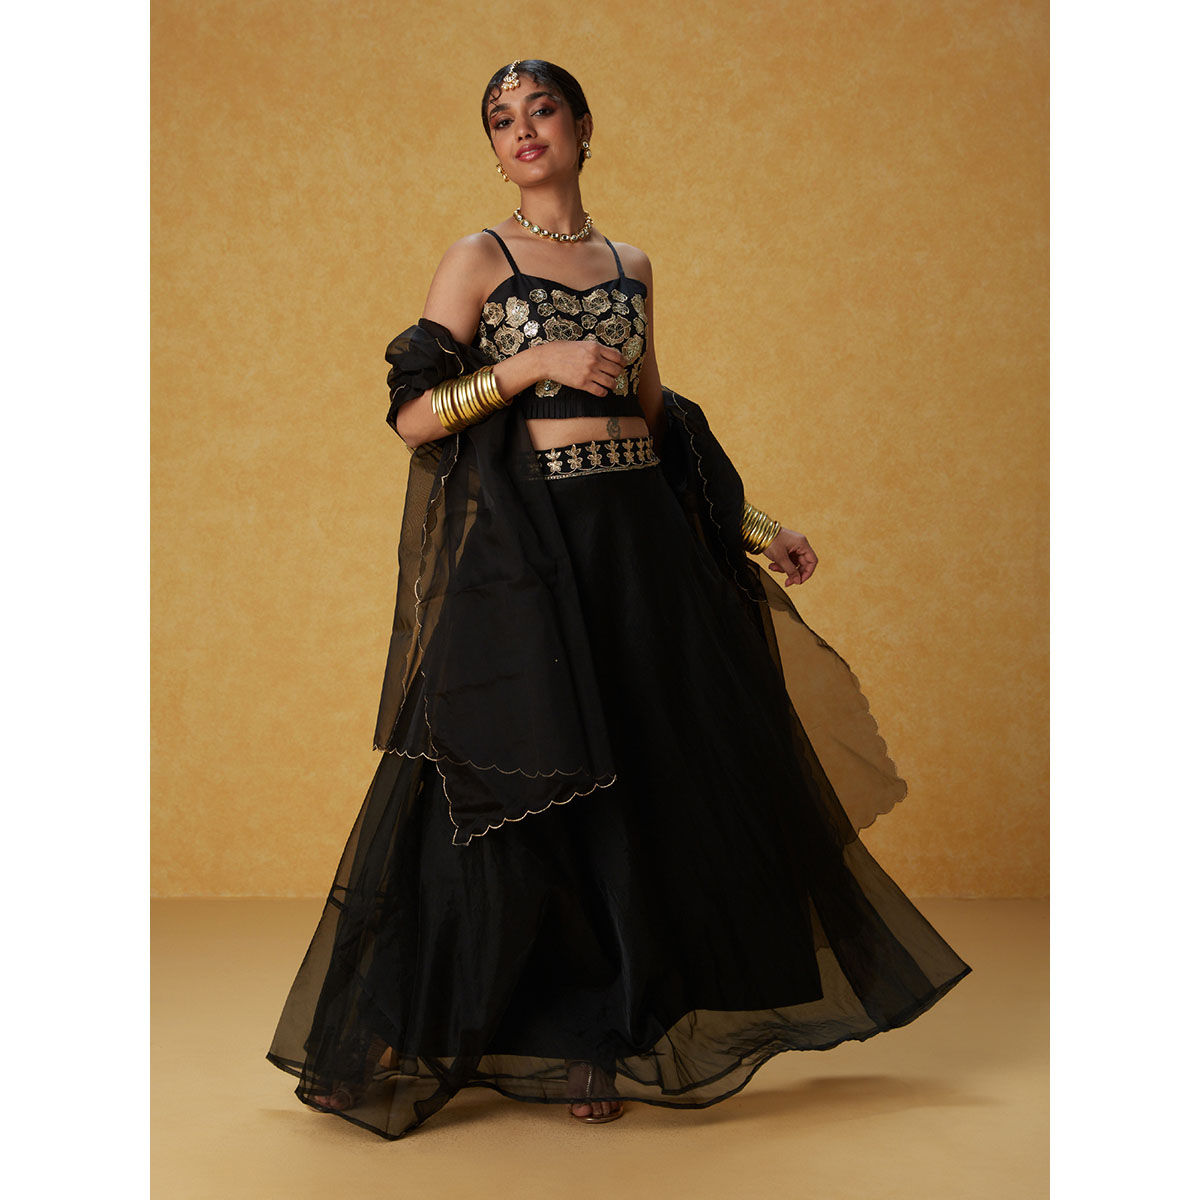 Ghoomar Lehengas – Indian Dance Costumes for Rent